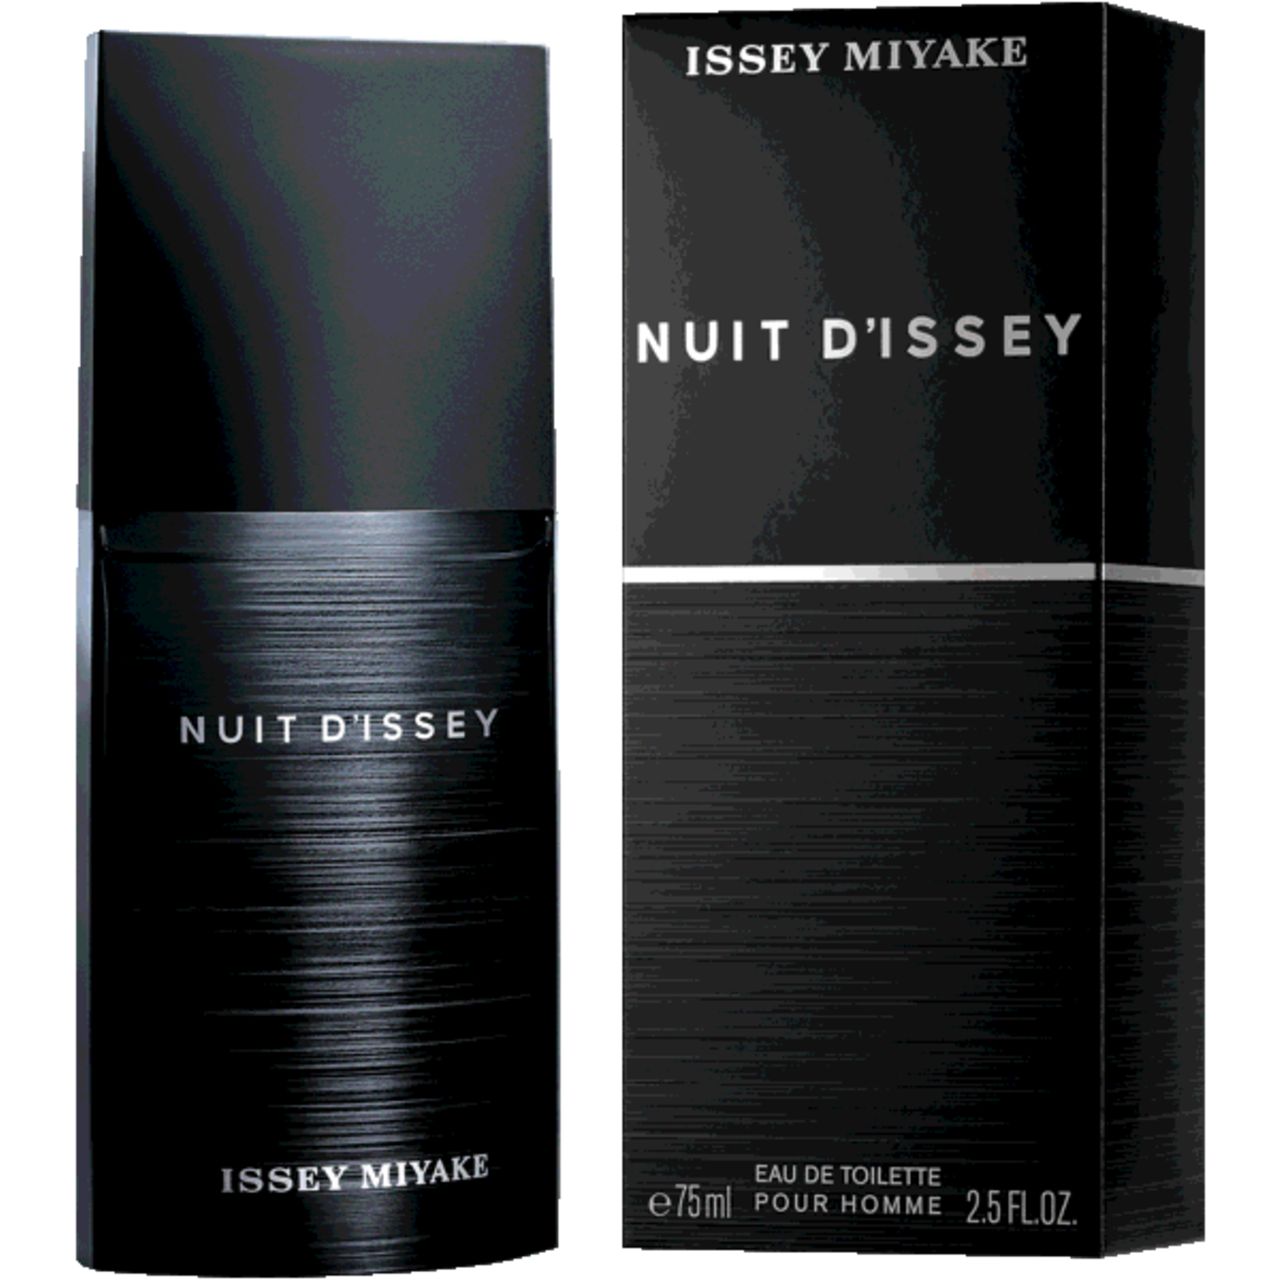 Issey Miyake, Nuit d'Issey E.d.T. Nat. Spray